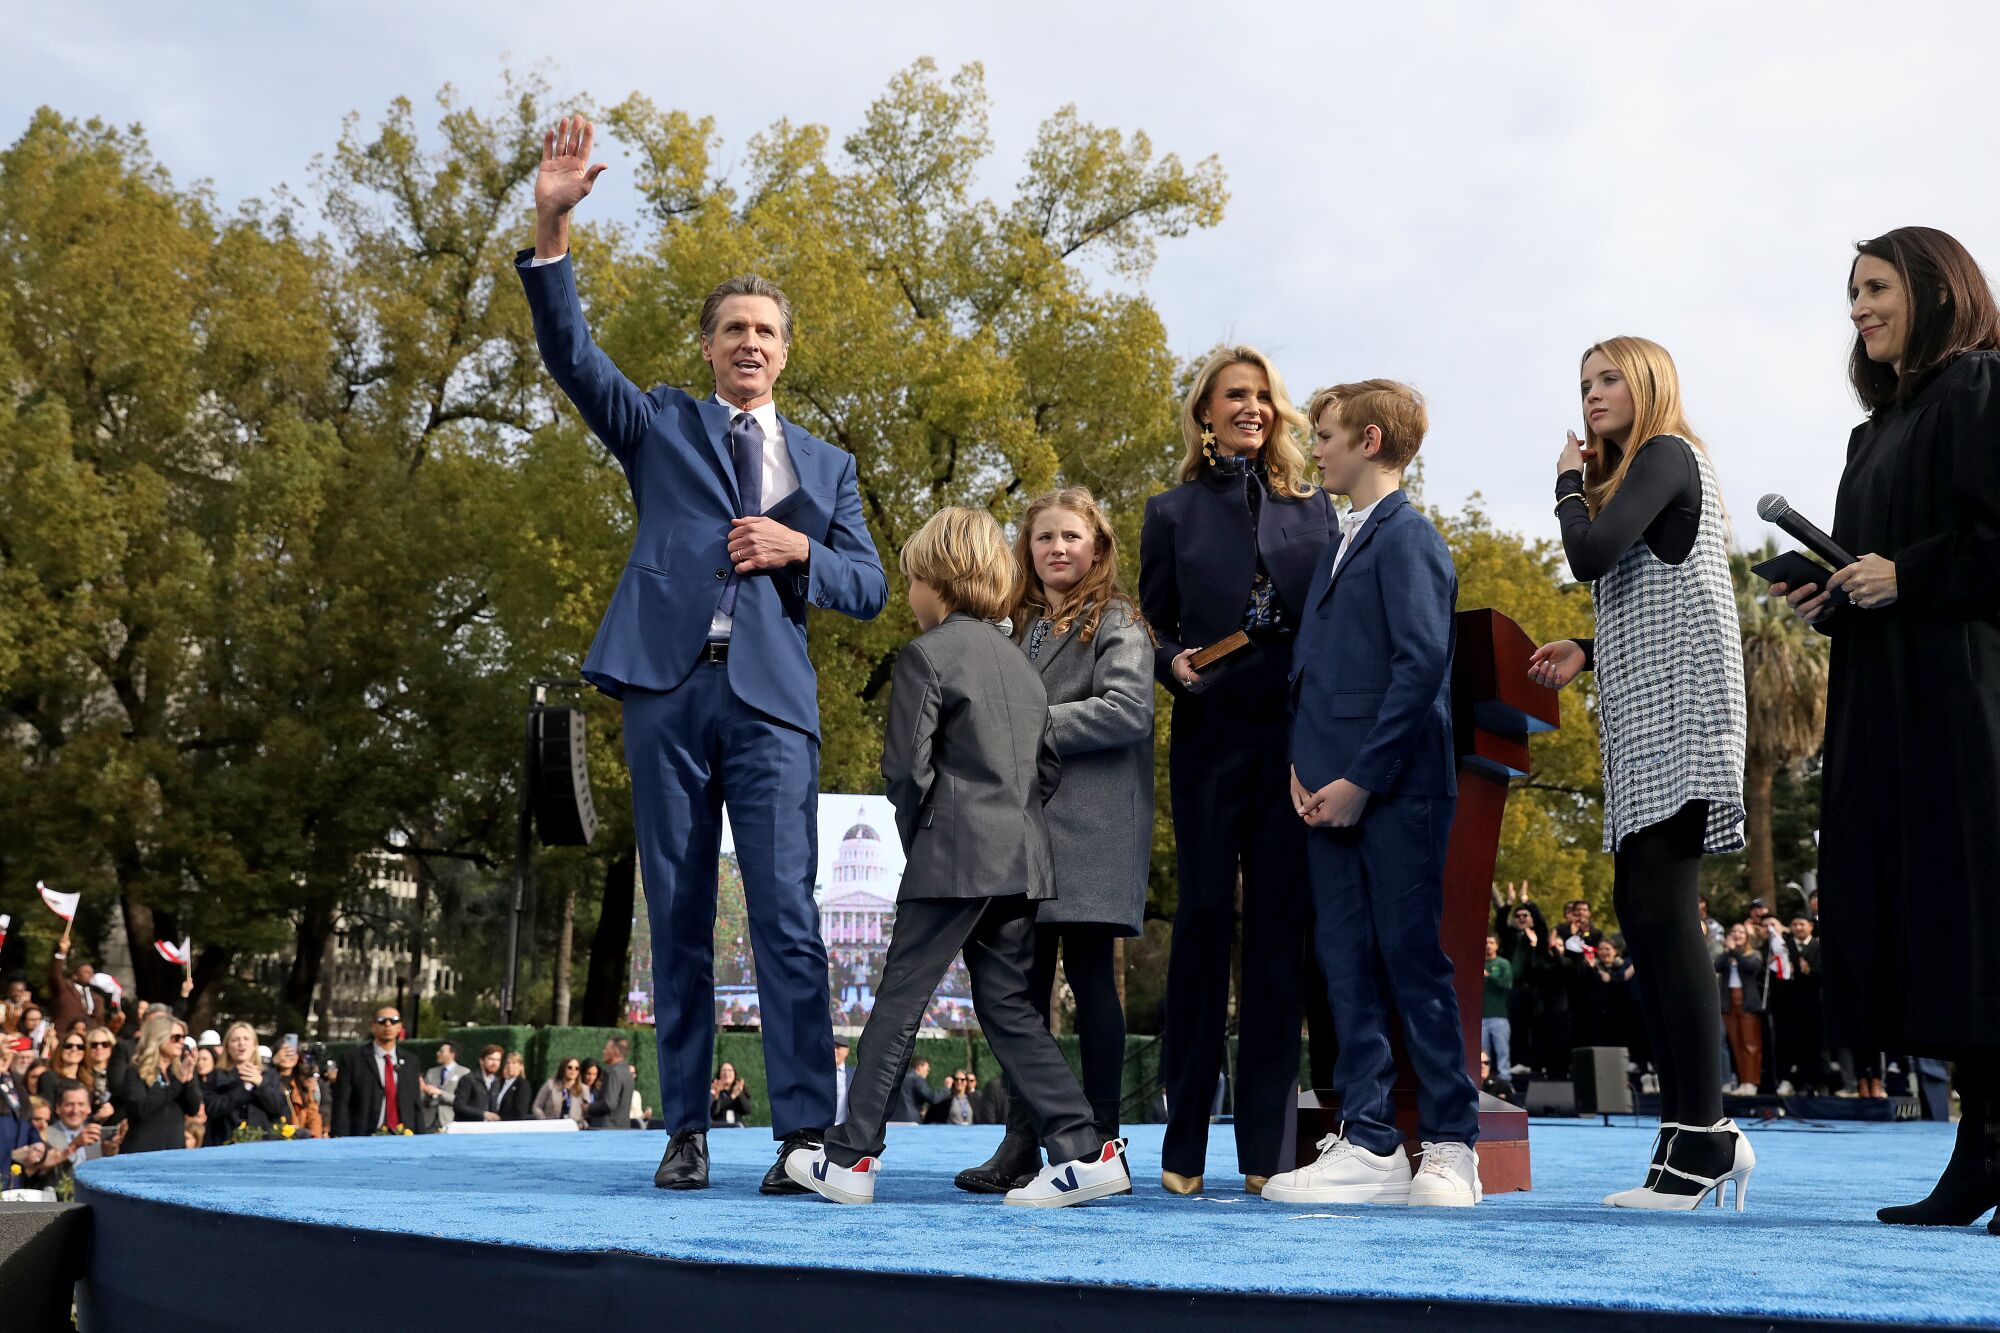 Gov. Gavin Newsom, after taking the oath of office being sworn in by Chief Justice Patricia Guerrero, his inauguration 